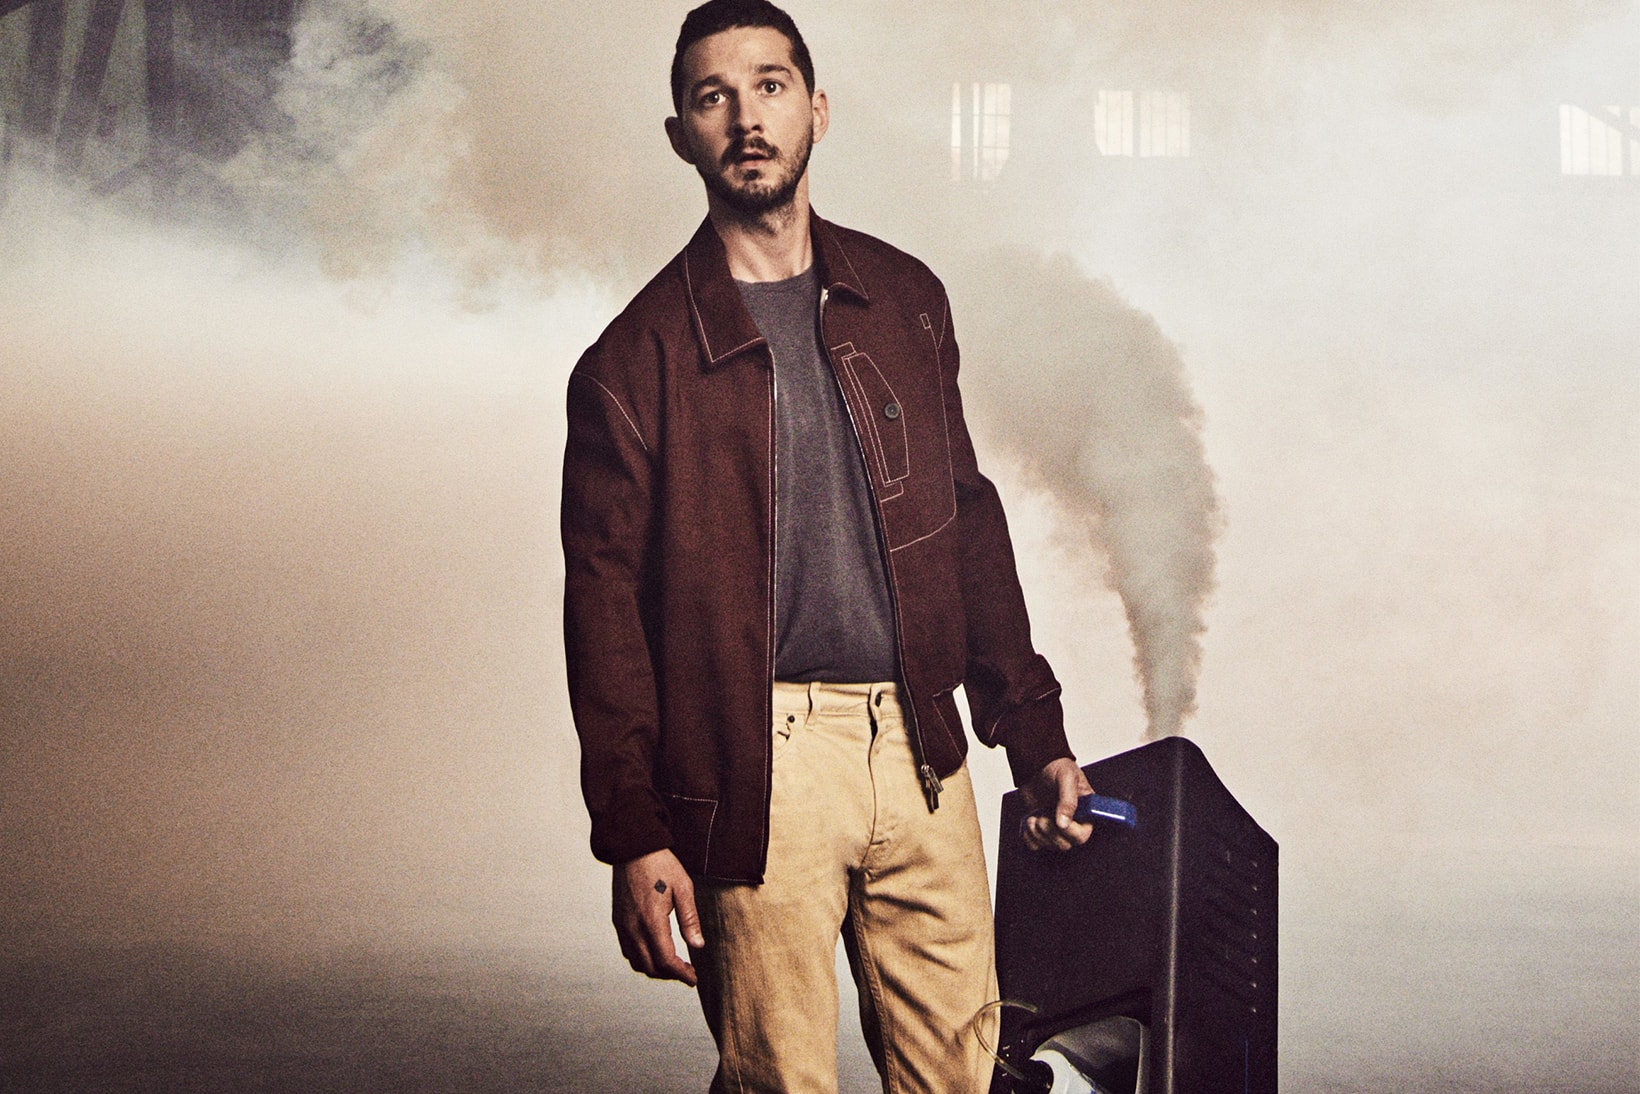 Shia LaBeouf Donates Clothes Kanye West military normcore esquire interview style yeezy cover story 2018 april issue